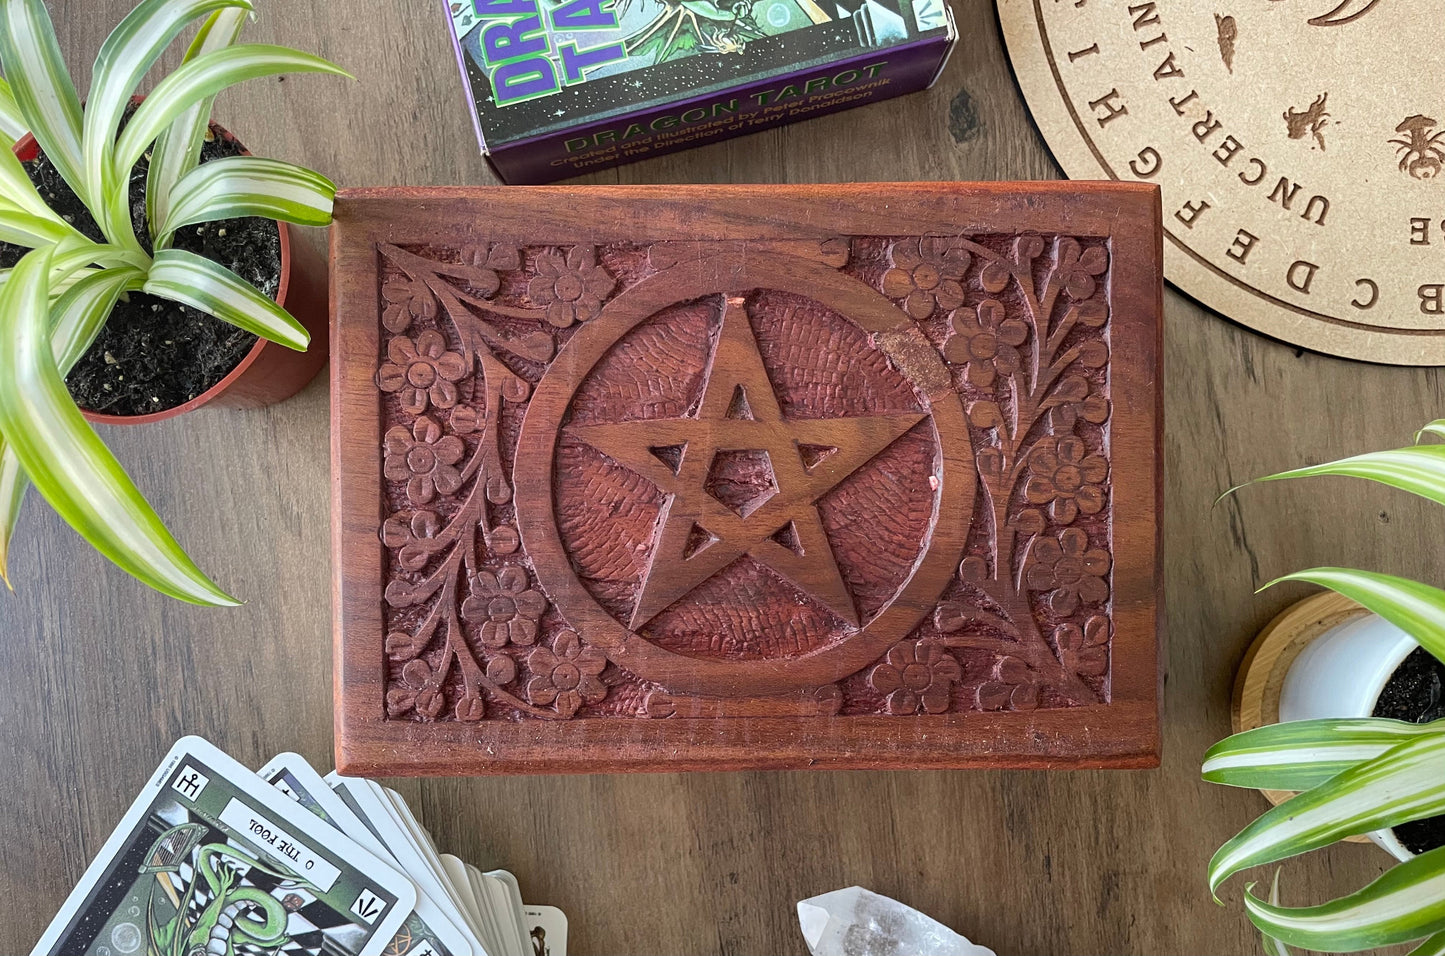 Pictured is hand-carved wood box with the pentacle symbol in the middle.